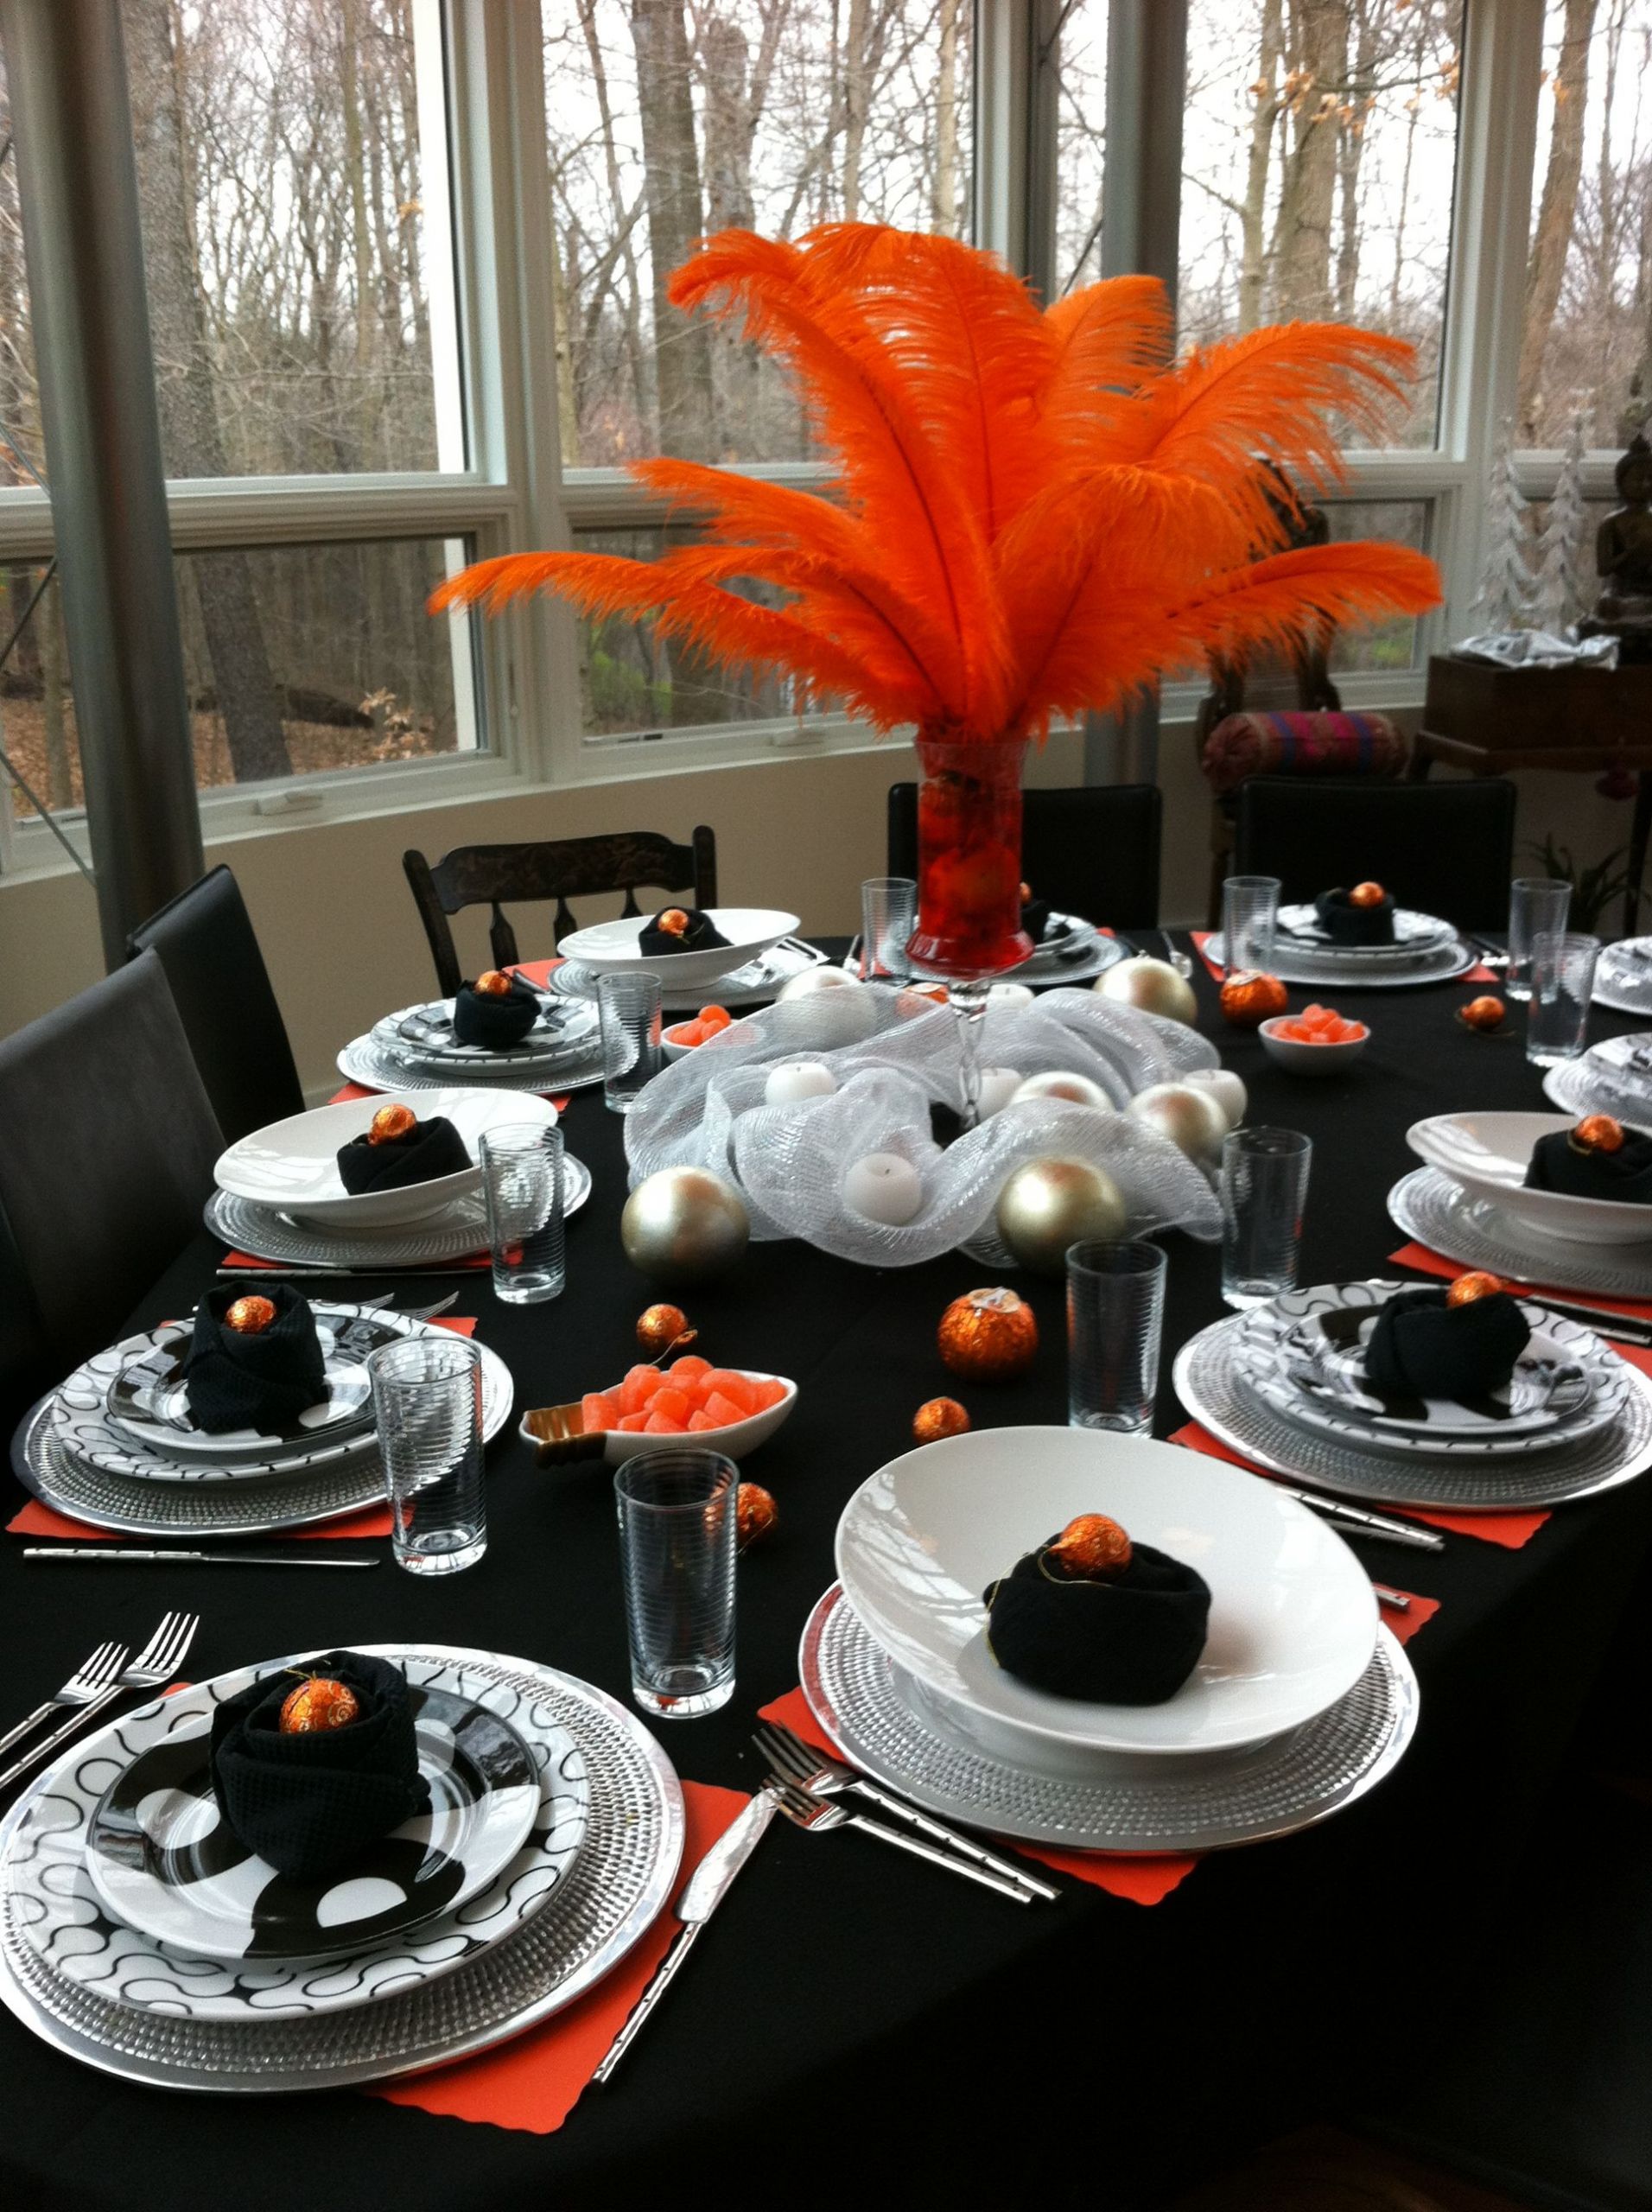 Orange And Black Graduation Party Ideas
 Feathers orange black and white birthday party table